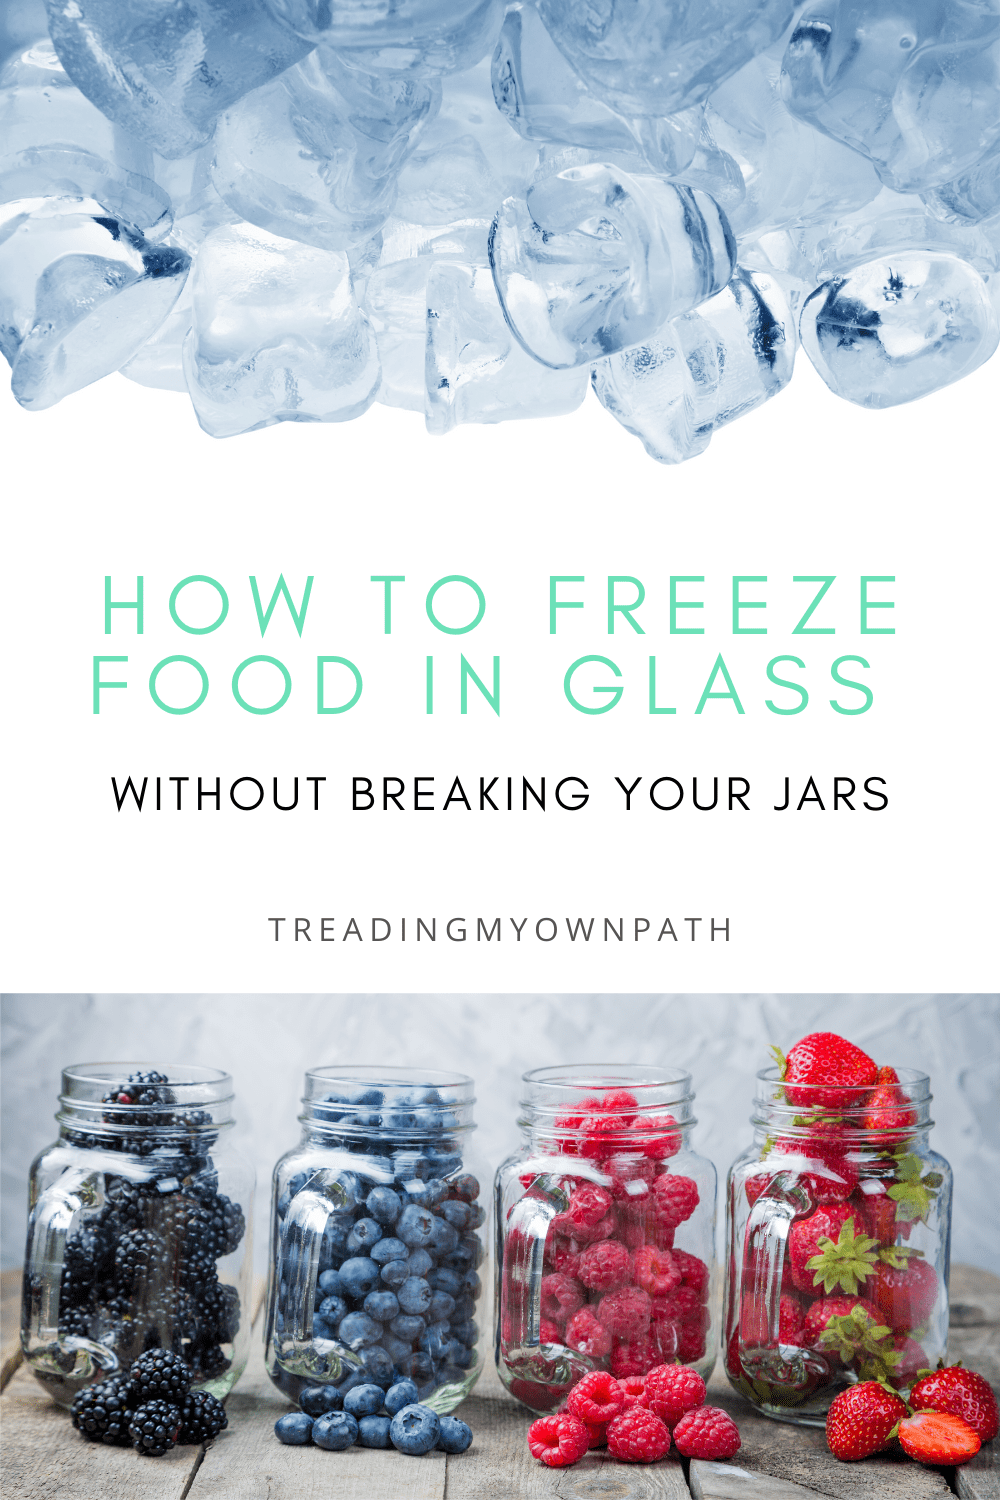 https://treadingmyownpath.com/wp-content/uploads/2021/06/How-to-freeze-food-in-glass-jars-reduce-food-waste-min.png